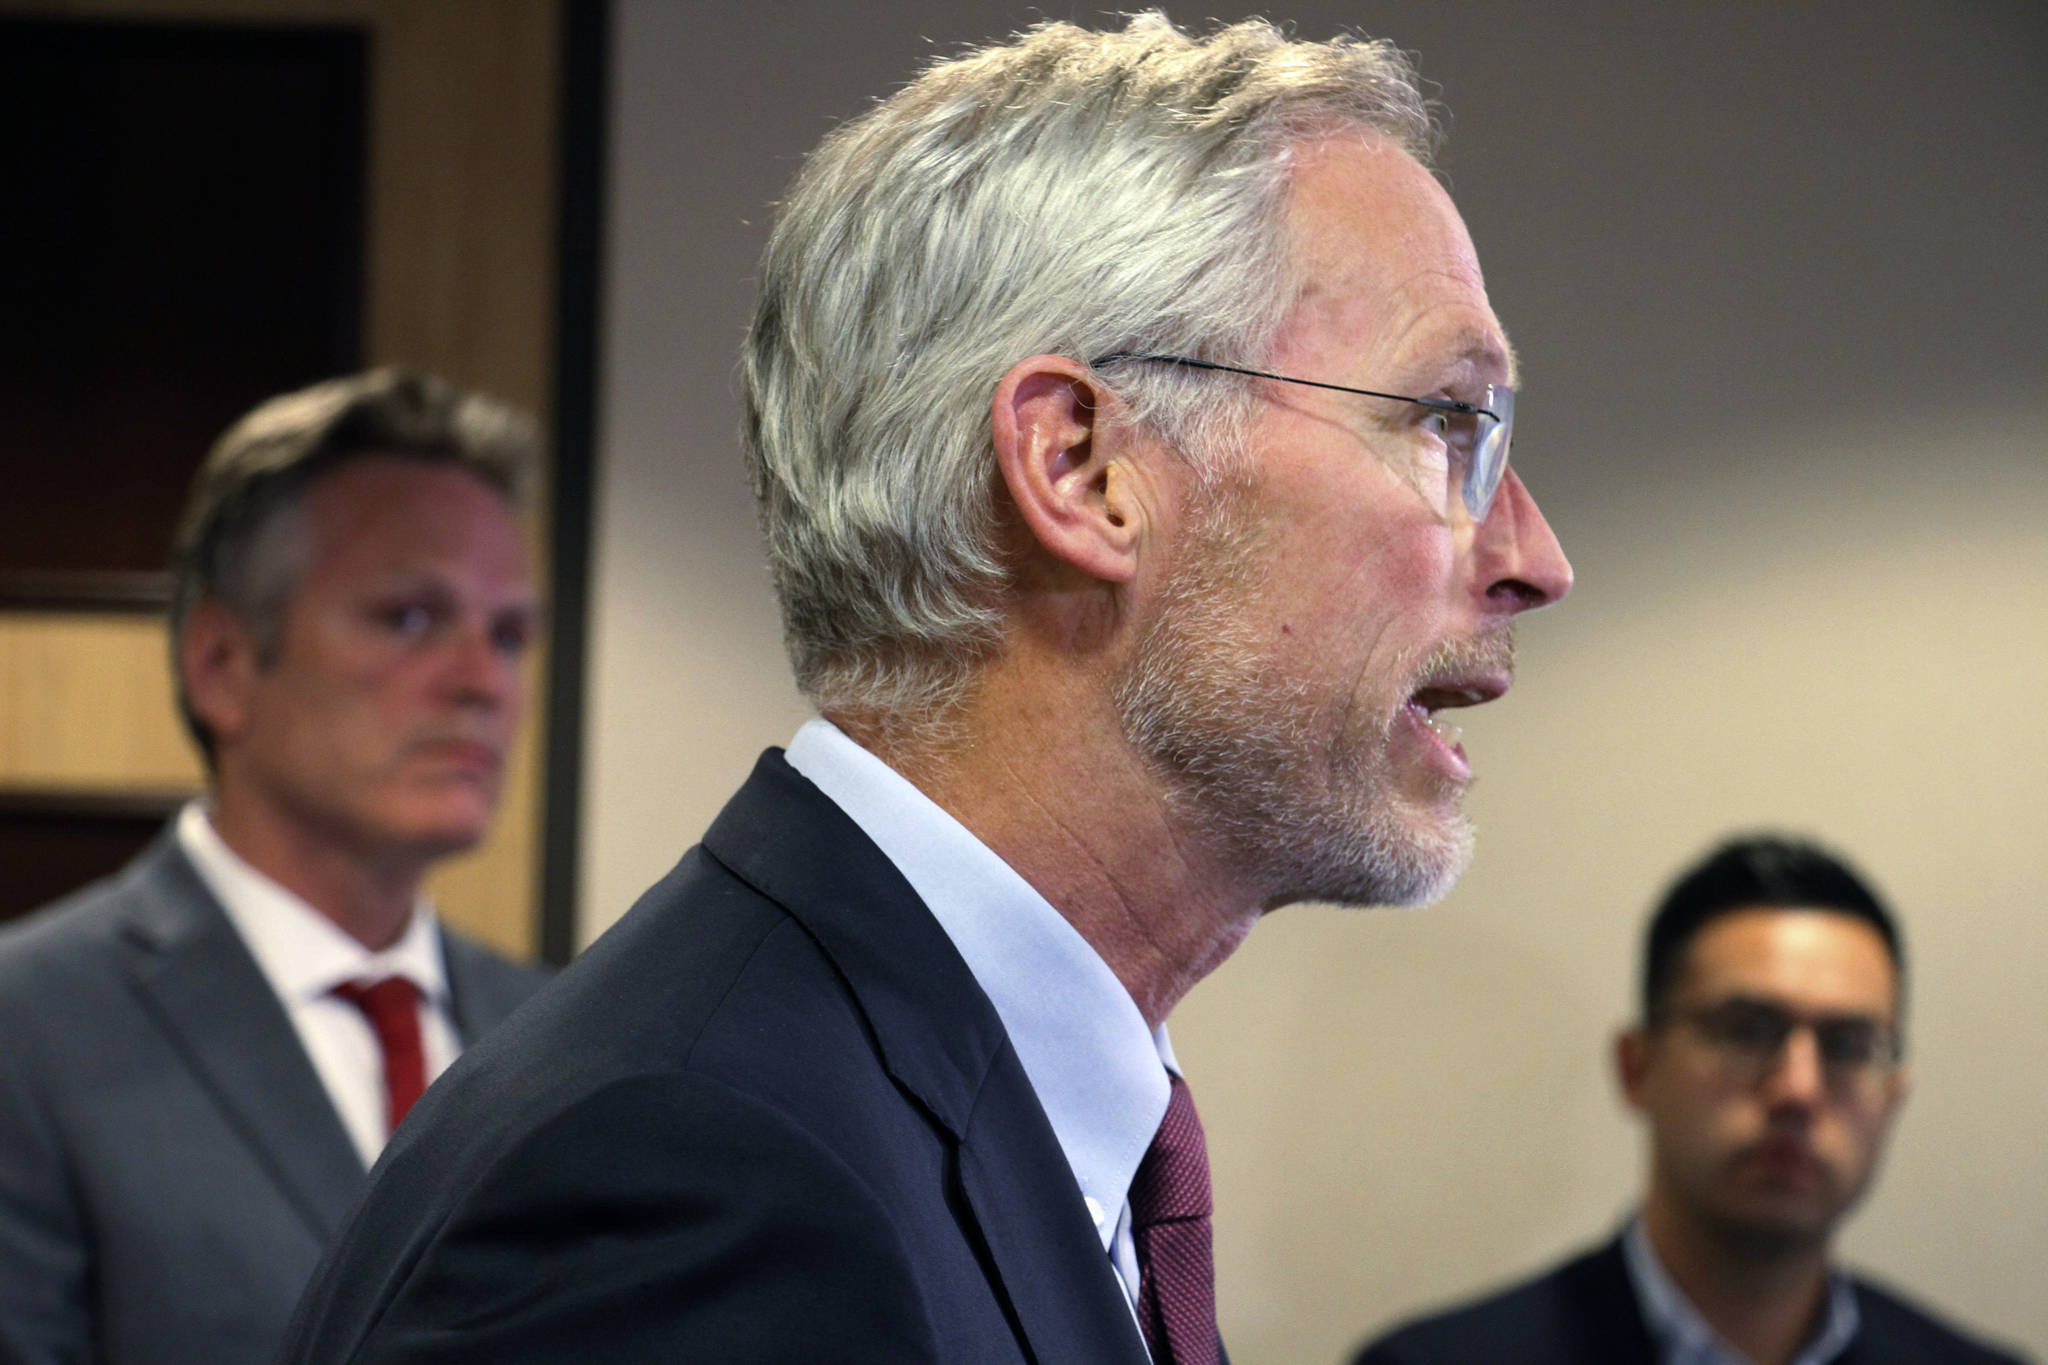 University of Alaska President Jim Johnsen speaks at a news conference in Anchorage, Alaska, Tuesday, Aug. 13, 2019, where Gov. Mike Dunleavy, back left, announced he would support a $25 million cut this year to the University of Alaska system. That is a sharp reversal from the $135 million cut Dunleavy earlier endorsed. In background at right is Dunleavy’s spokesman Matt Shuckerow. (AP Photo/Mark Thiessen)